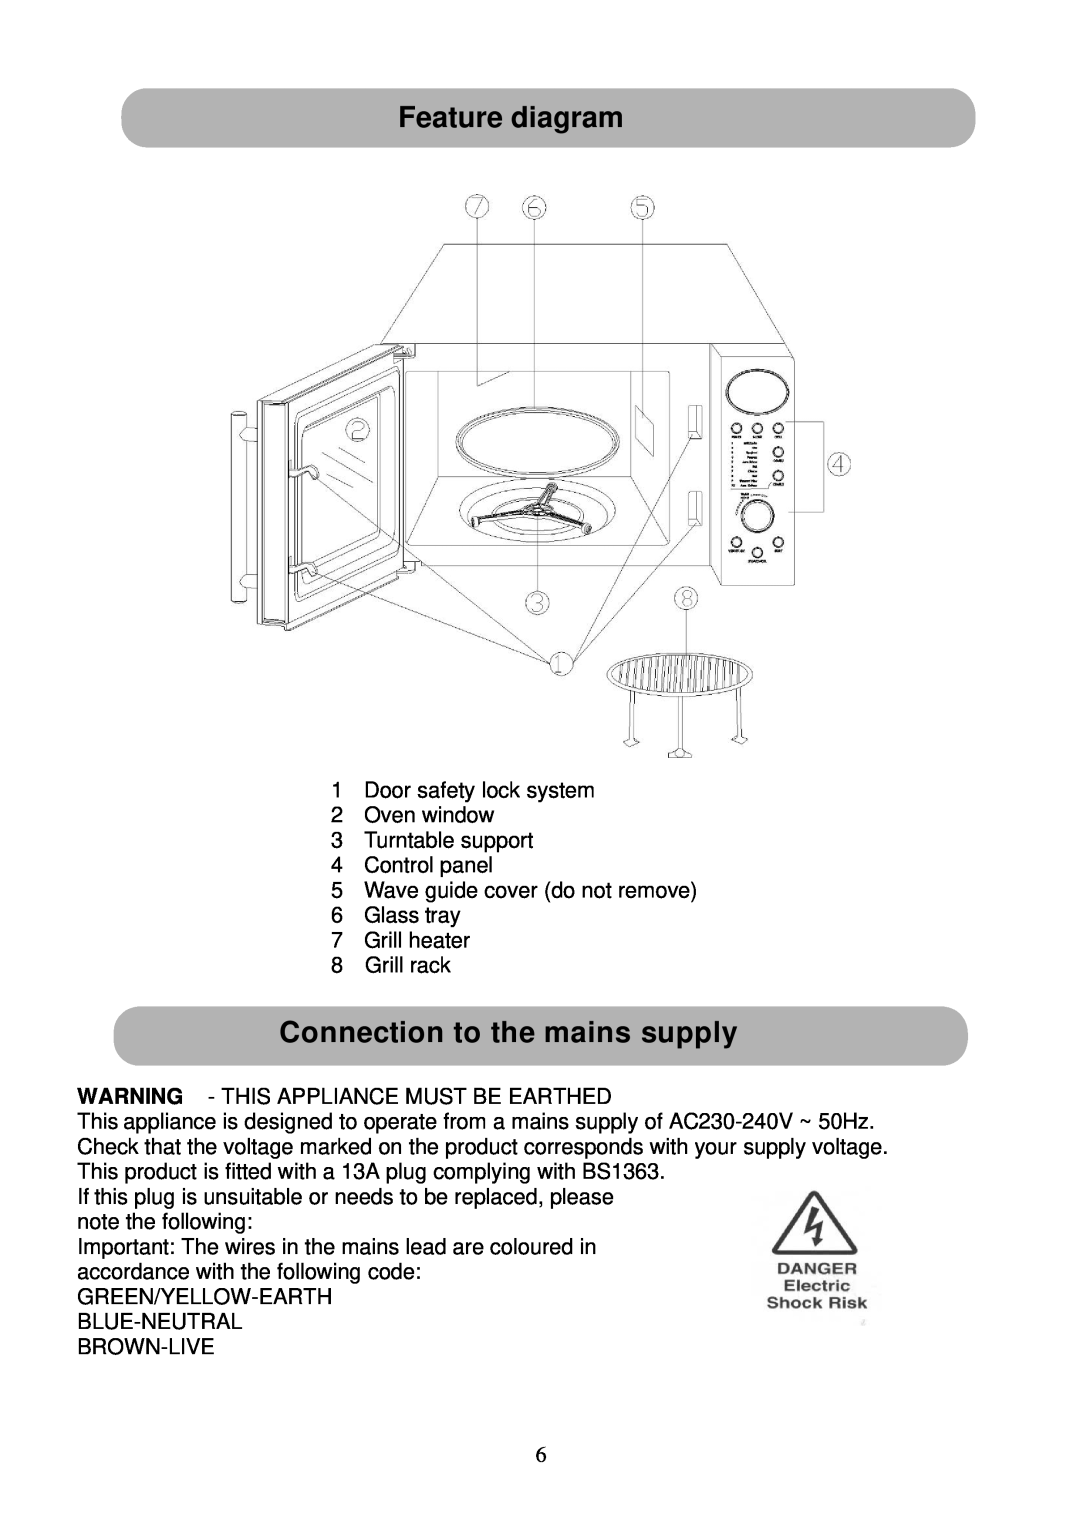 Russell Hobbs RHM2015 user manual Feature diagram, Connection to the mains supply 